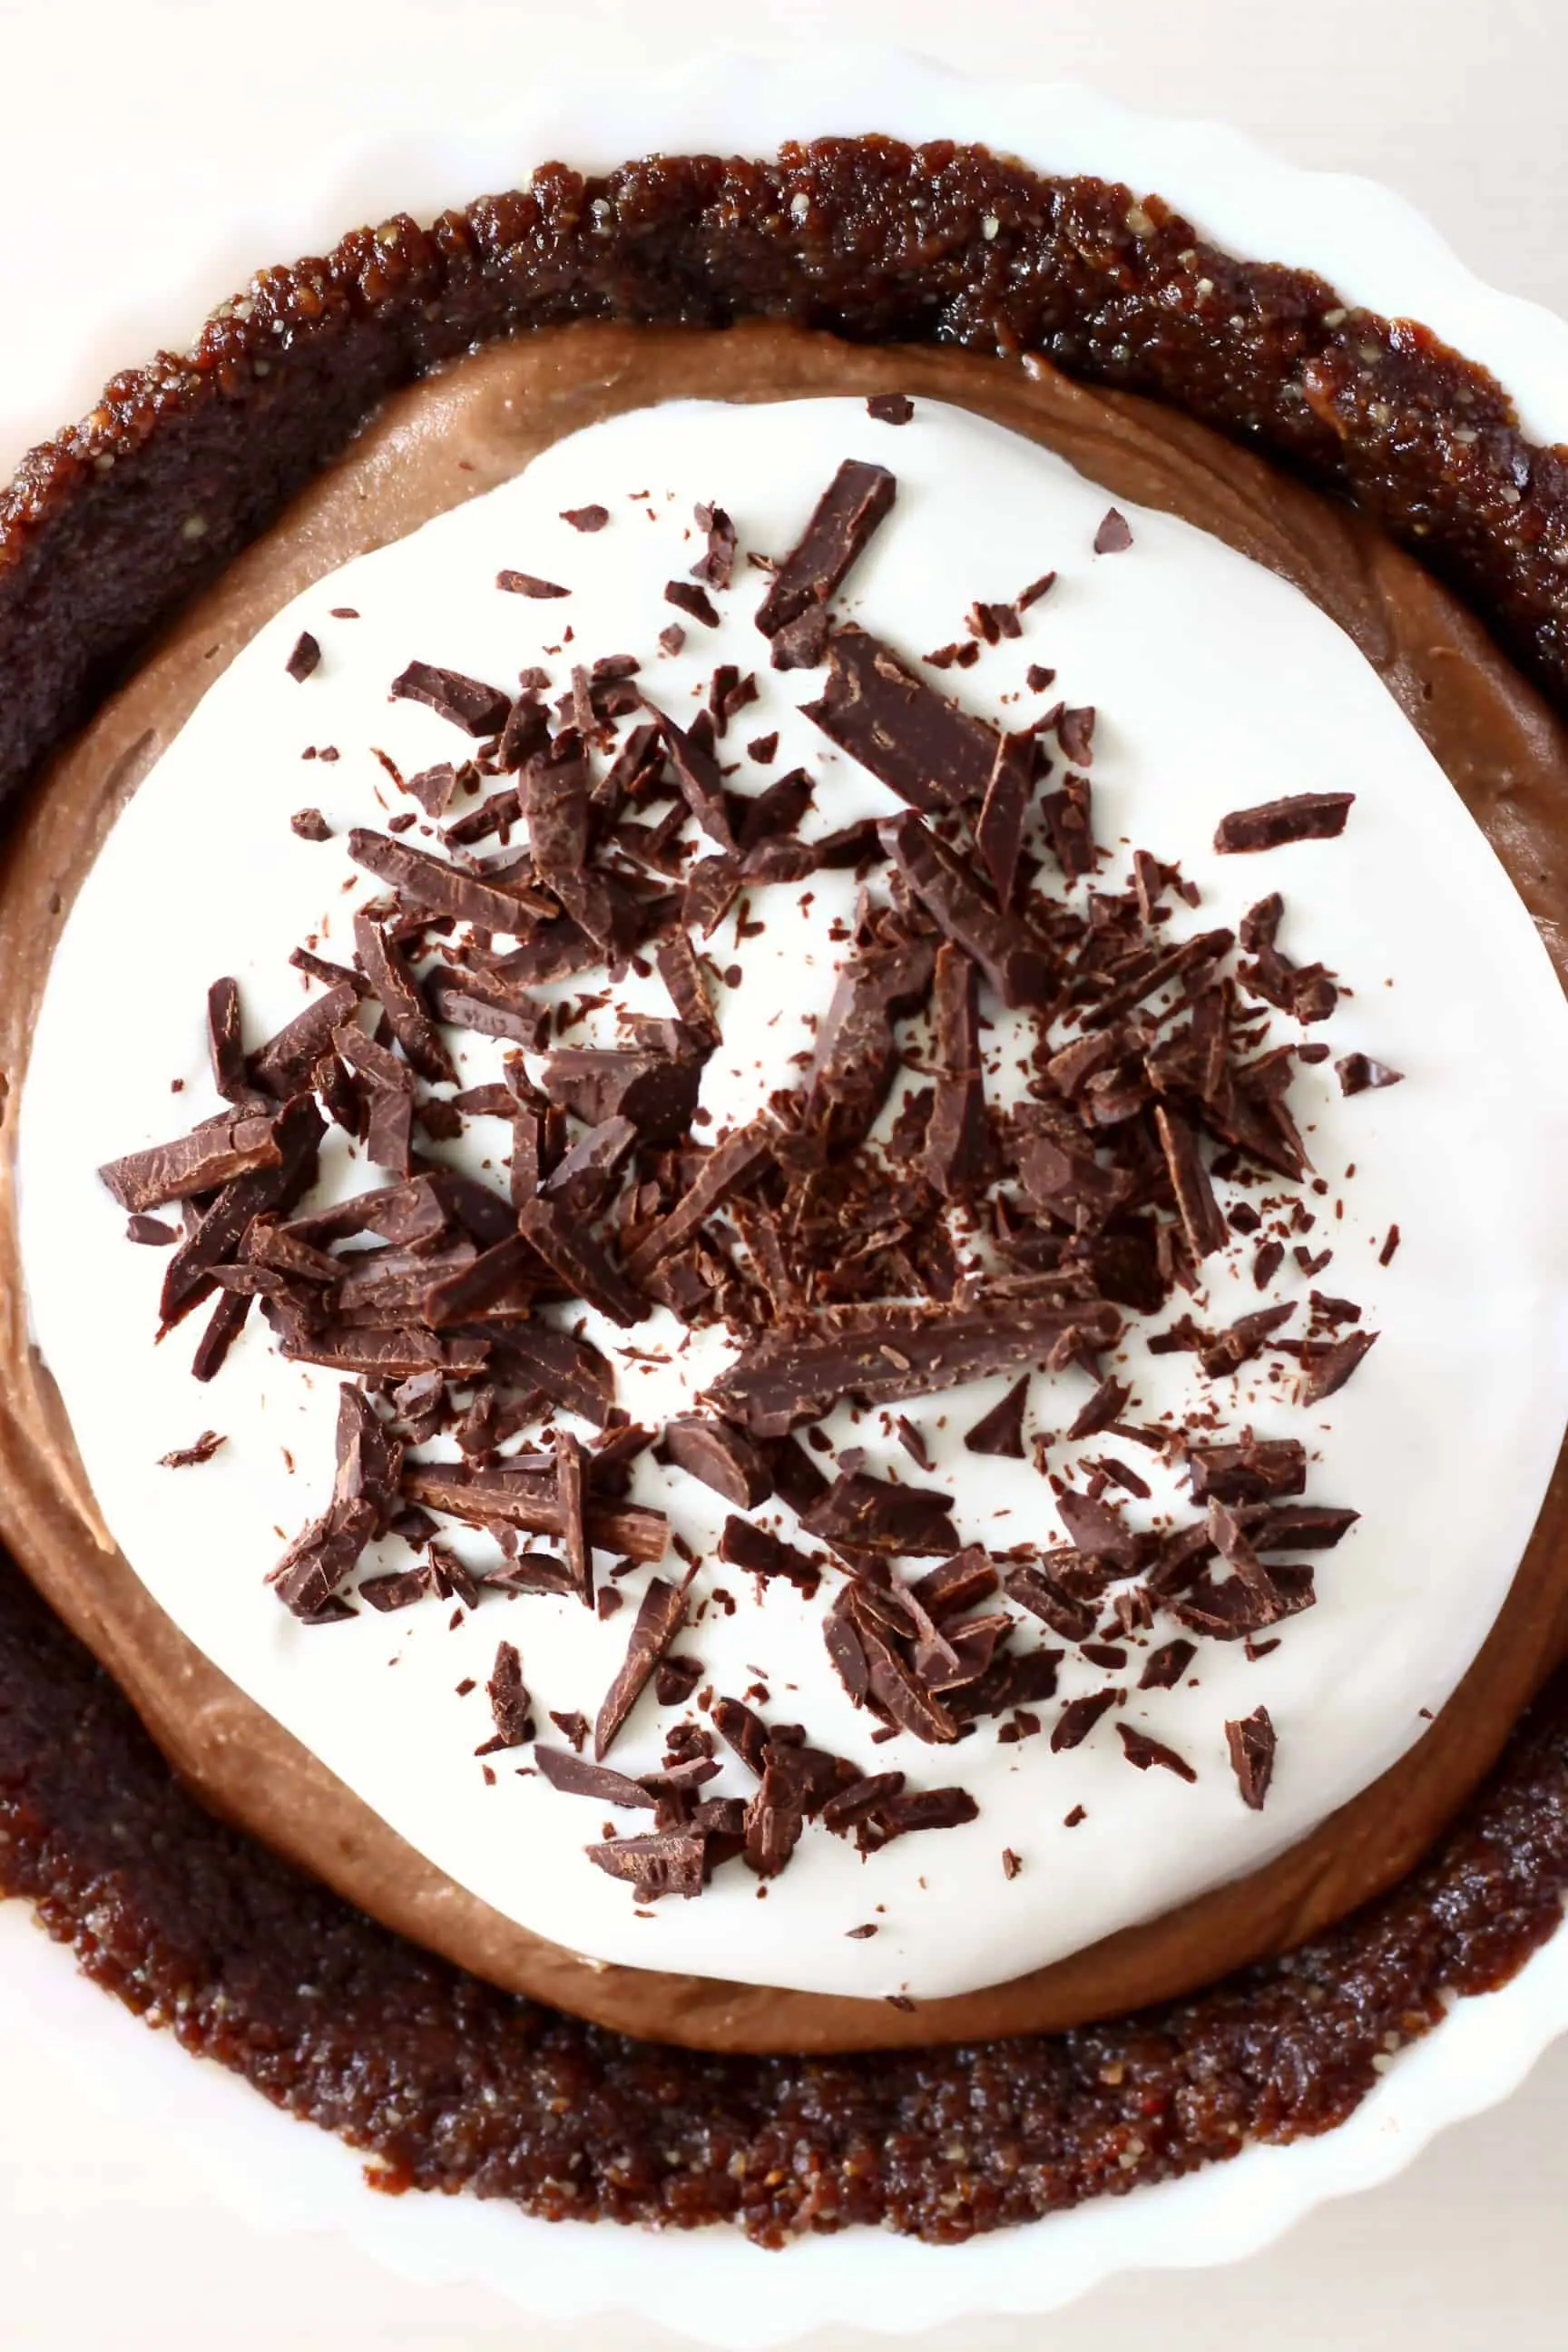 Chocolate pie topped with whipped cream and chocolate shavings in a white pie dish against a white background